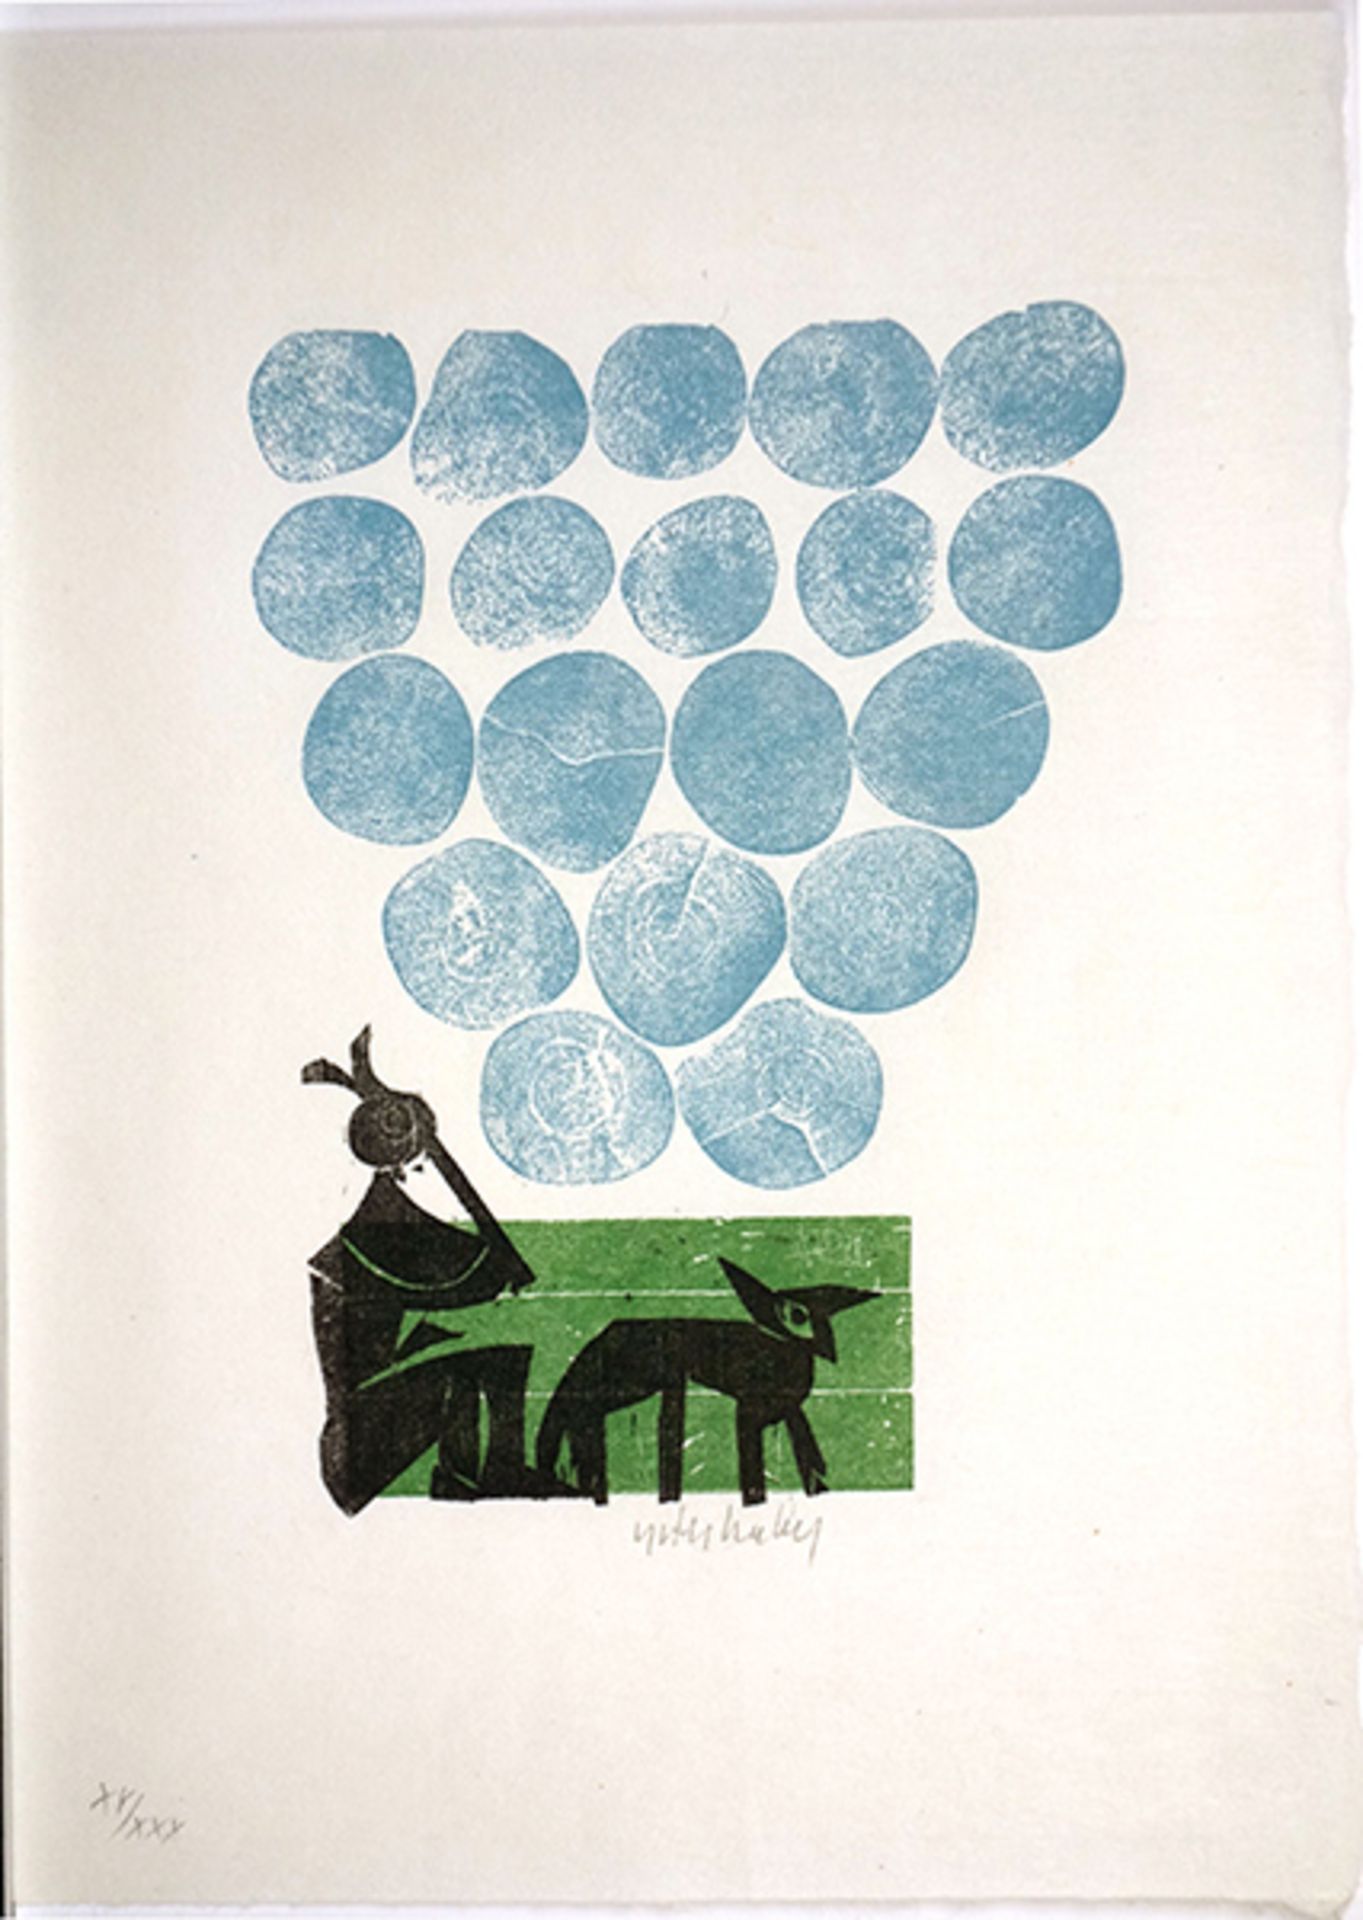 Federwolken (1978)Book with 1 color woodcut by the artist HAP Grieshaber, signed and numbered "XV/